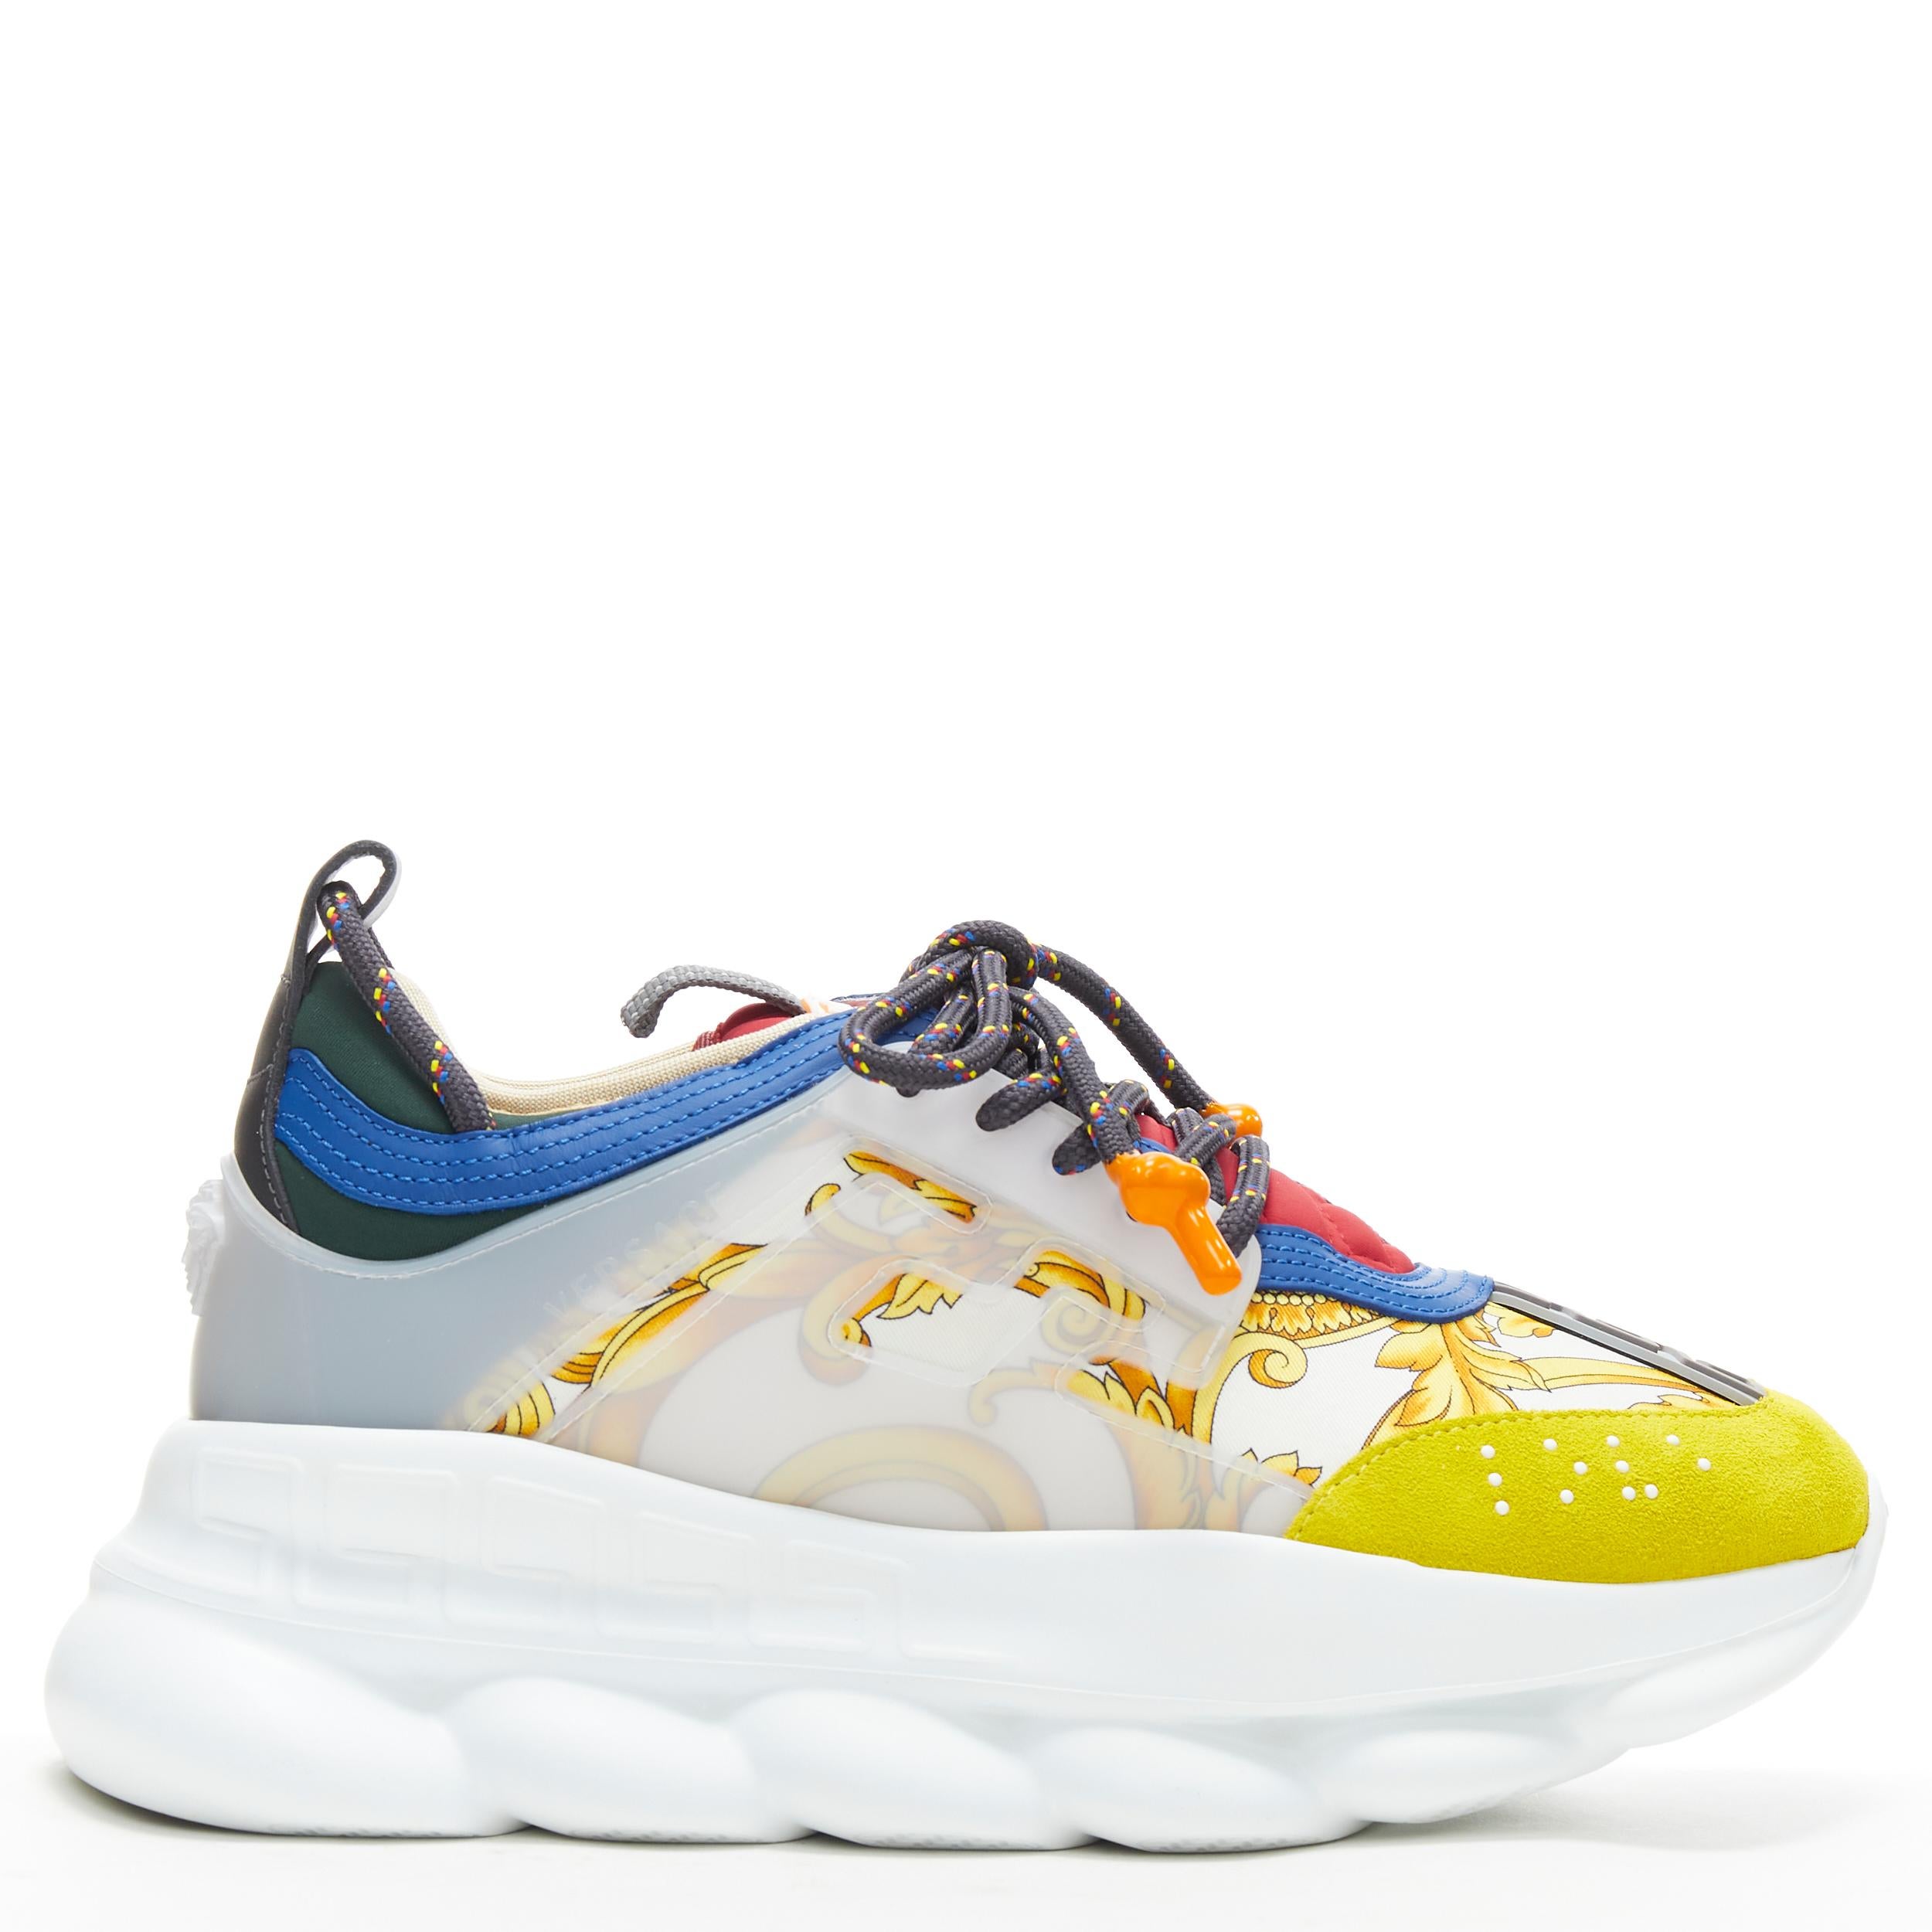 new VERSACE Chain Reaction gold barocco twill yellow blue suede sneaker EU40 US7 
Reference: TGAS/B00876 
Brand: Versace 
Designer: Salehe Bembury 
Model: Chain Reaction White Barocco 
Material: Leather 
Color: Gold 
Pattern: Solid 
Closure: Lace up